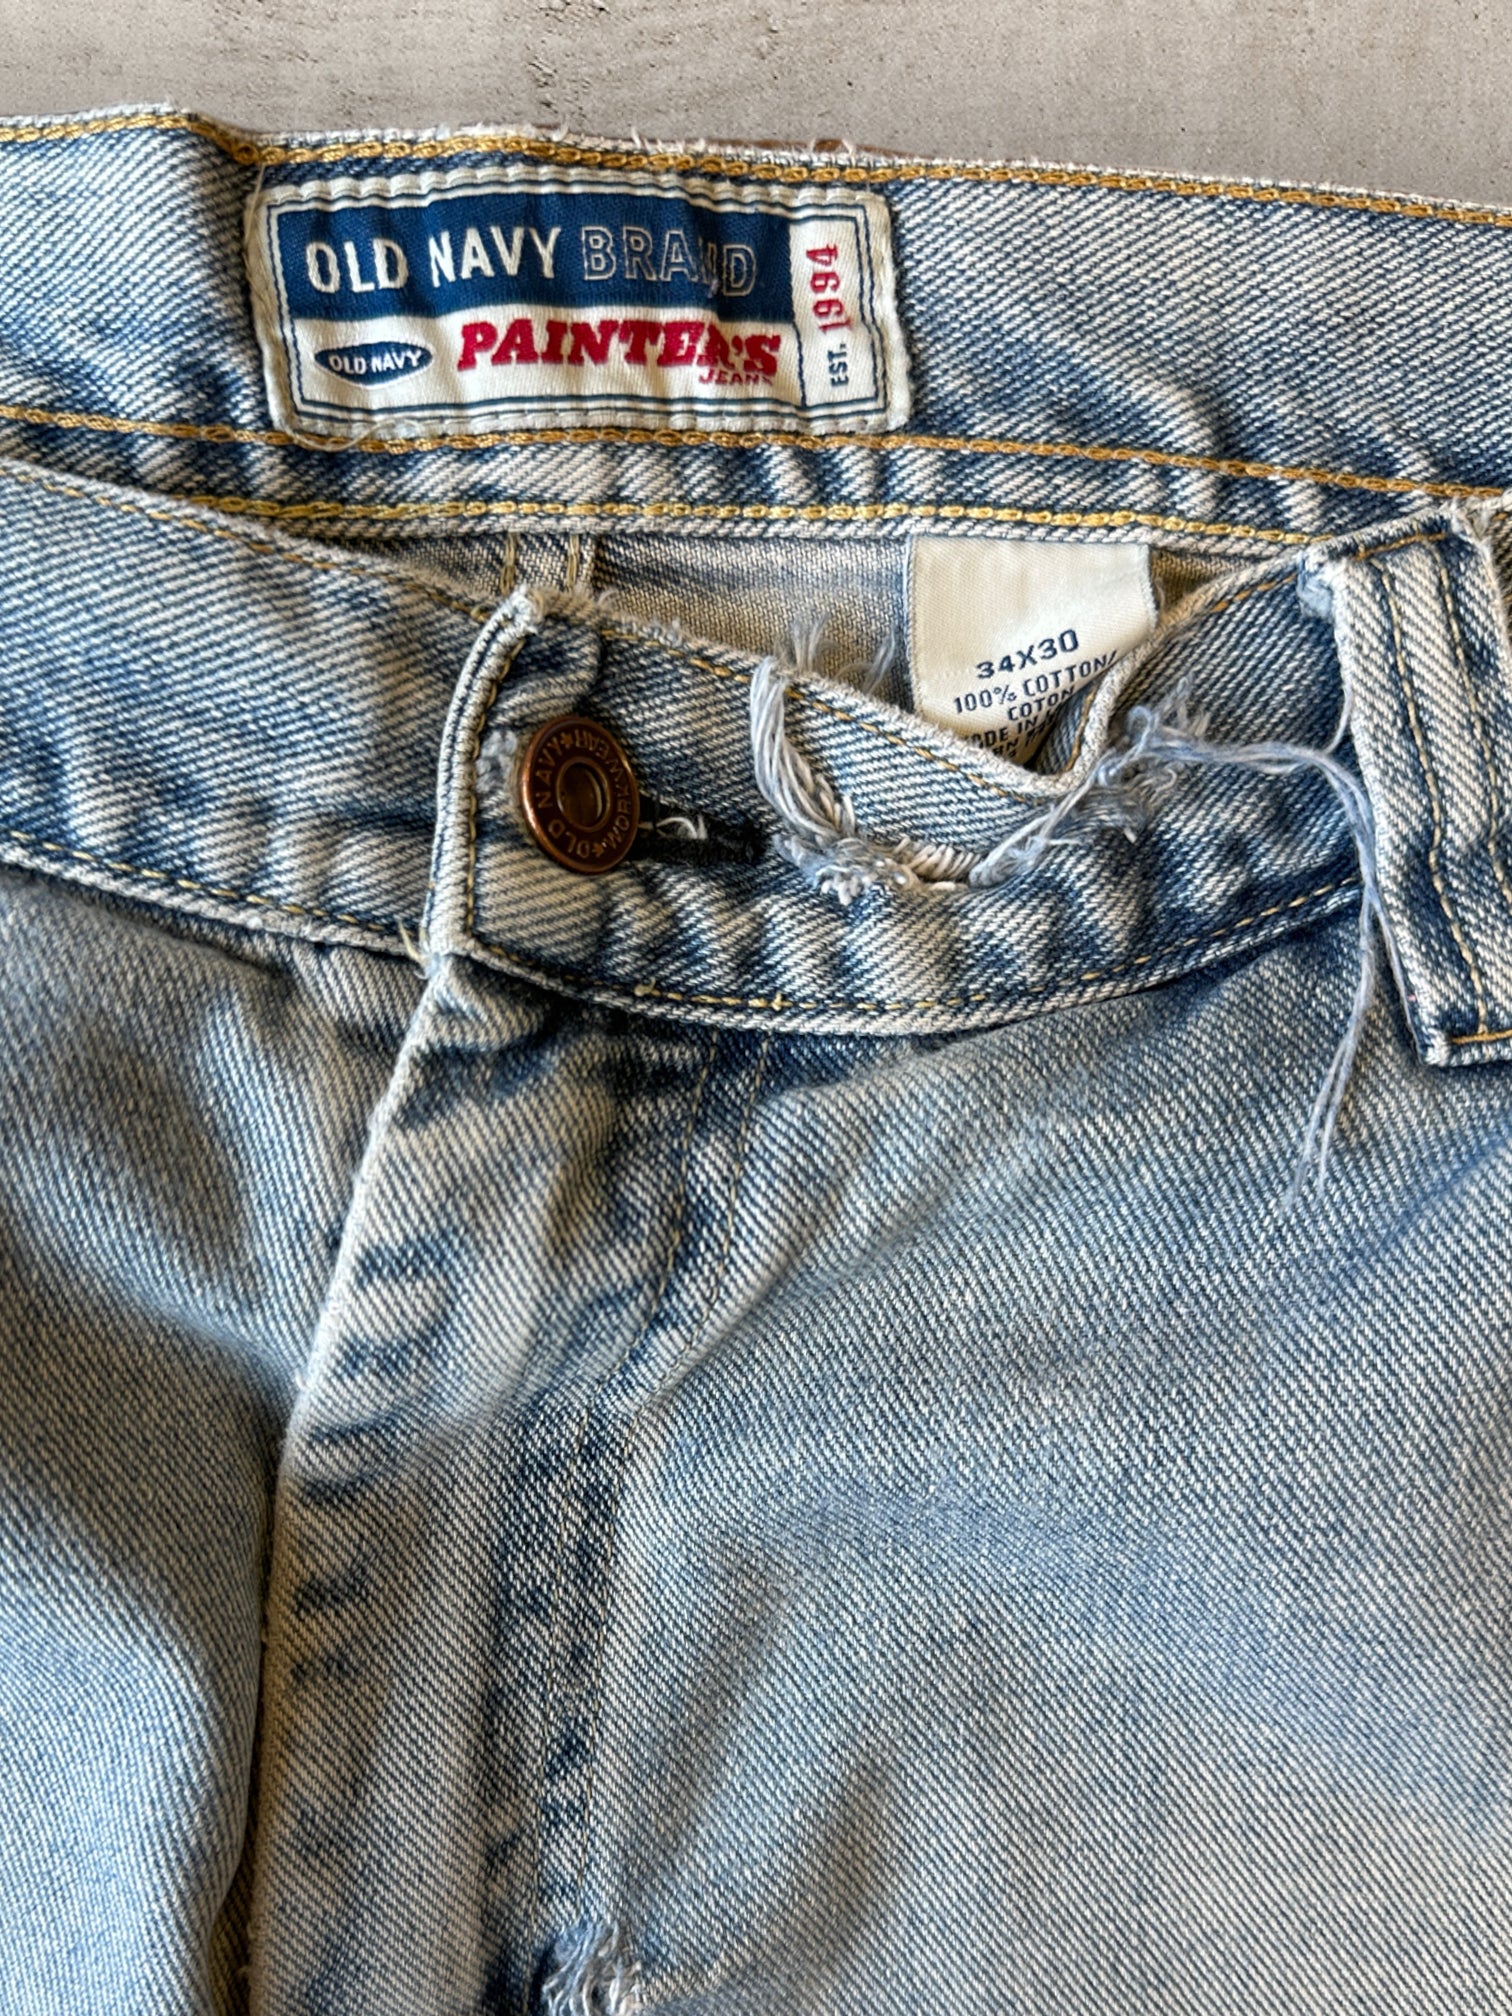 00s Old Navy Faded Light Wash Painter Denim Jeans - 36x27